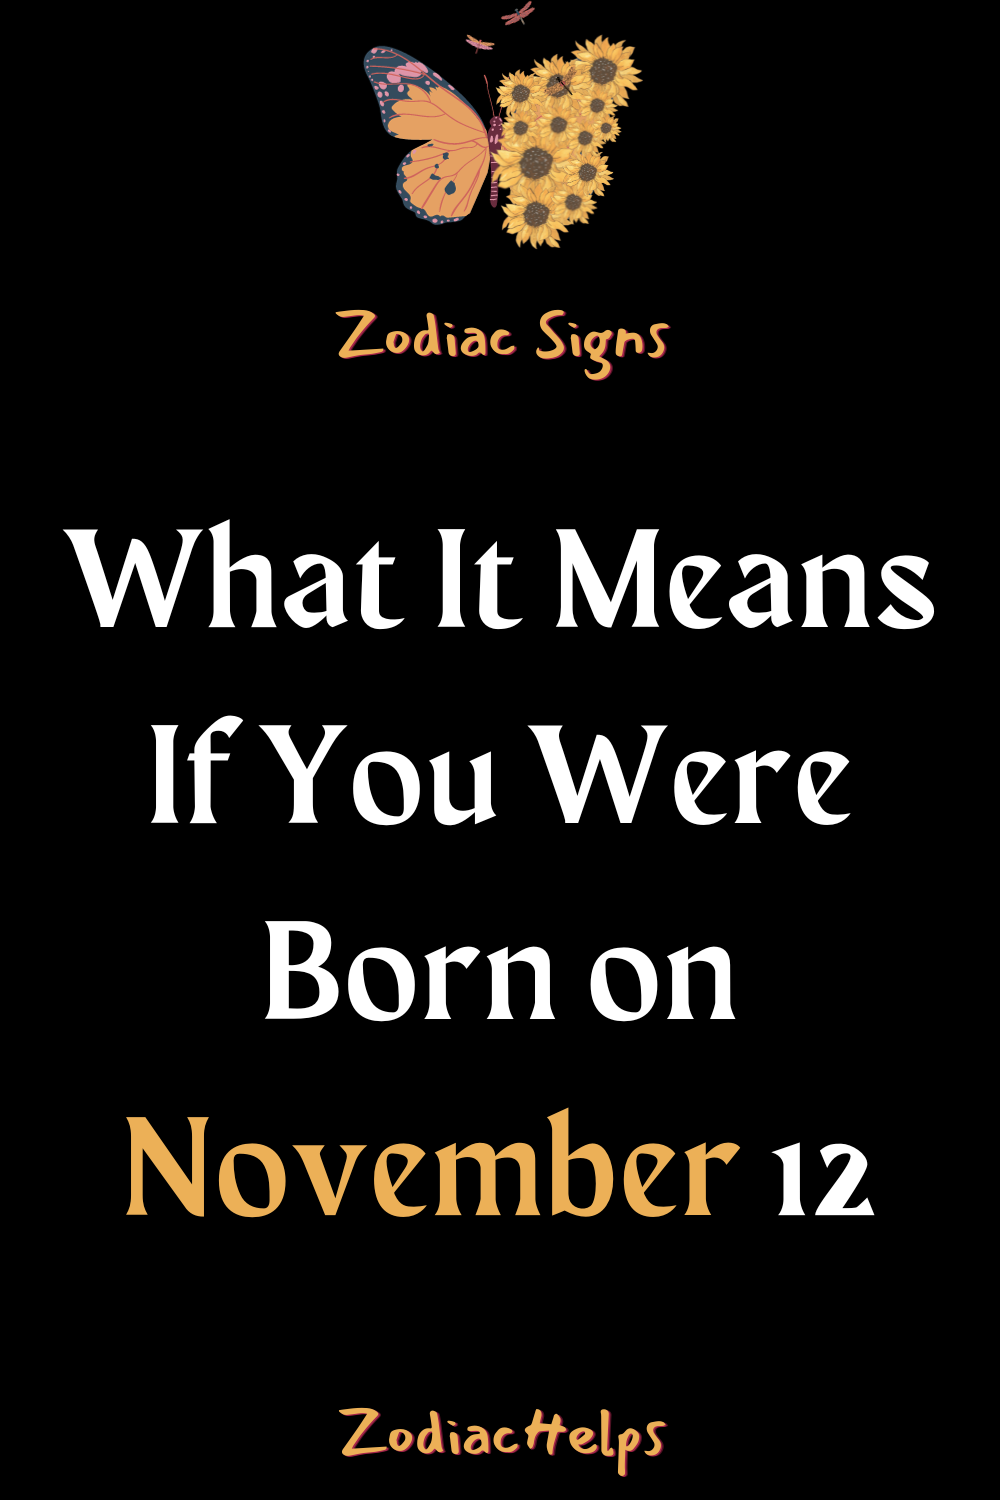 What It Means If You Were Born on November 12